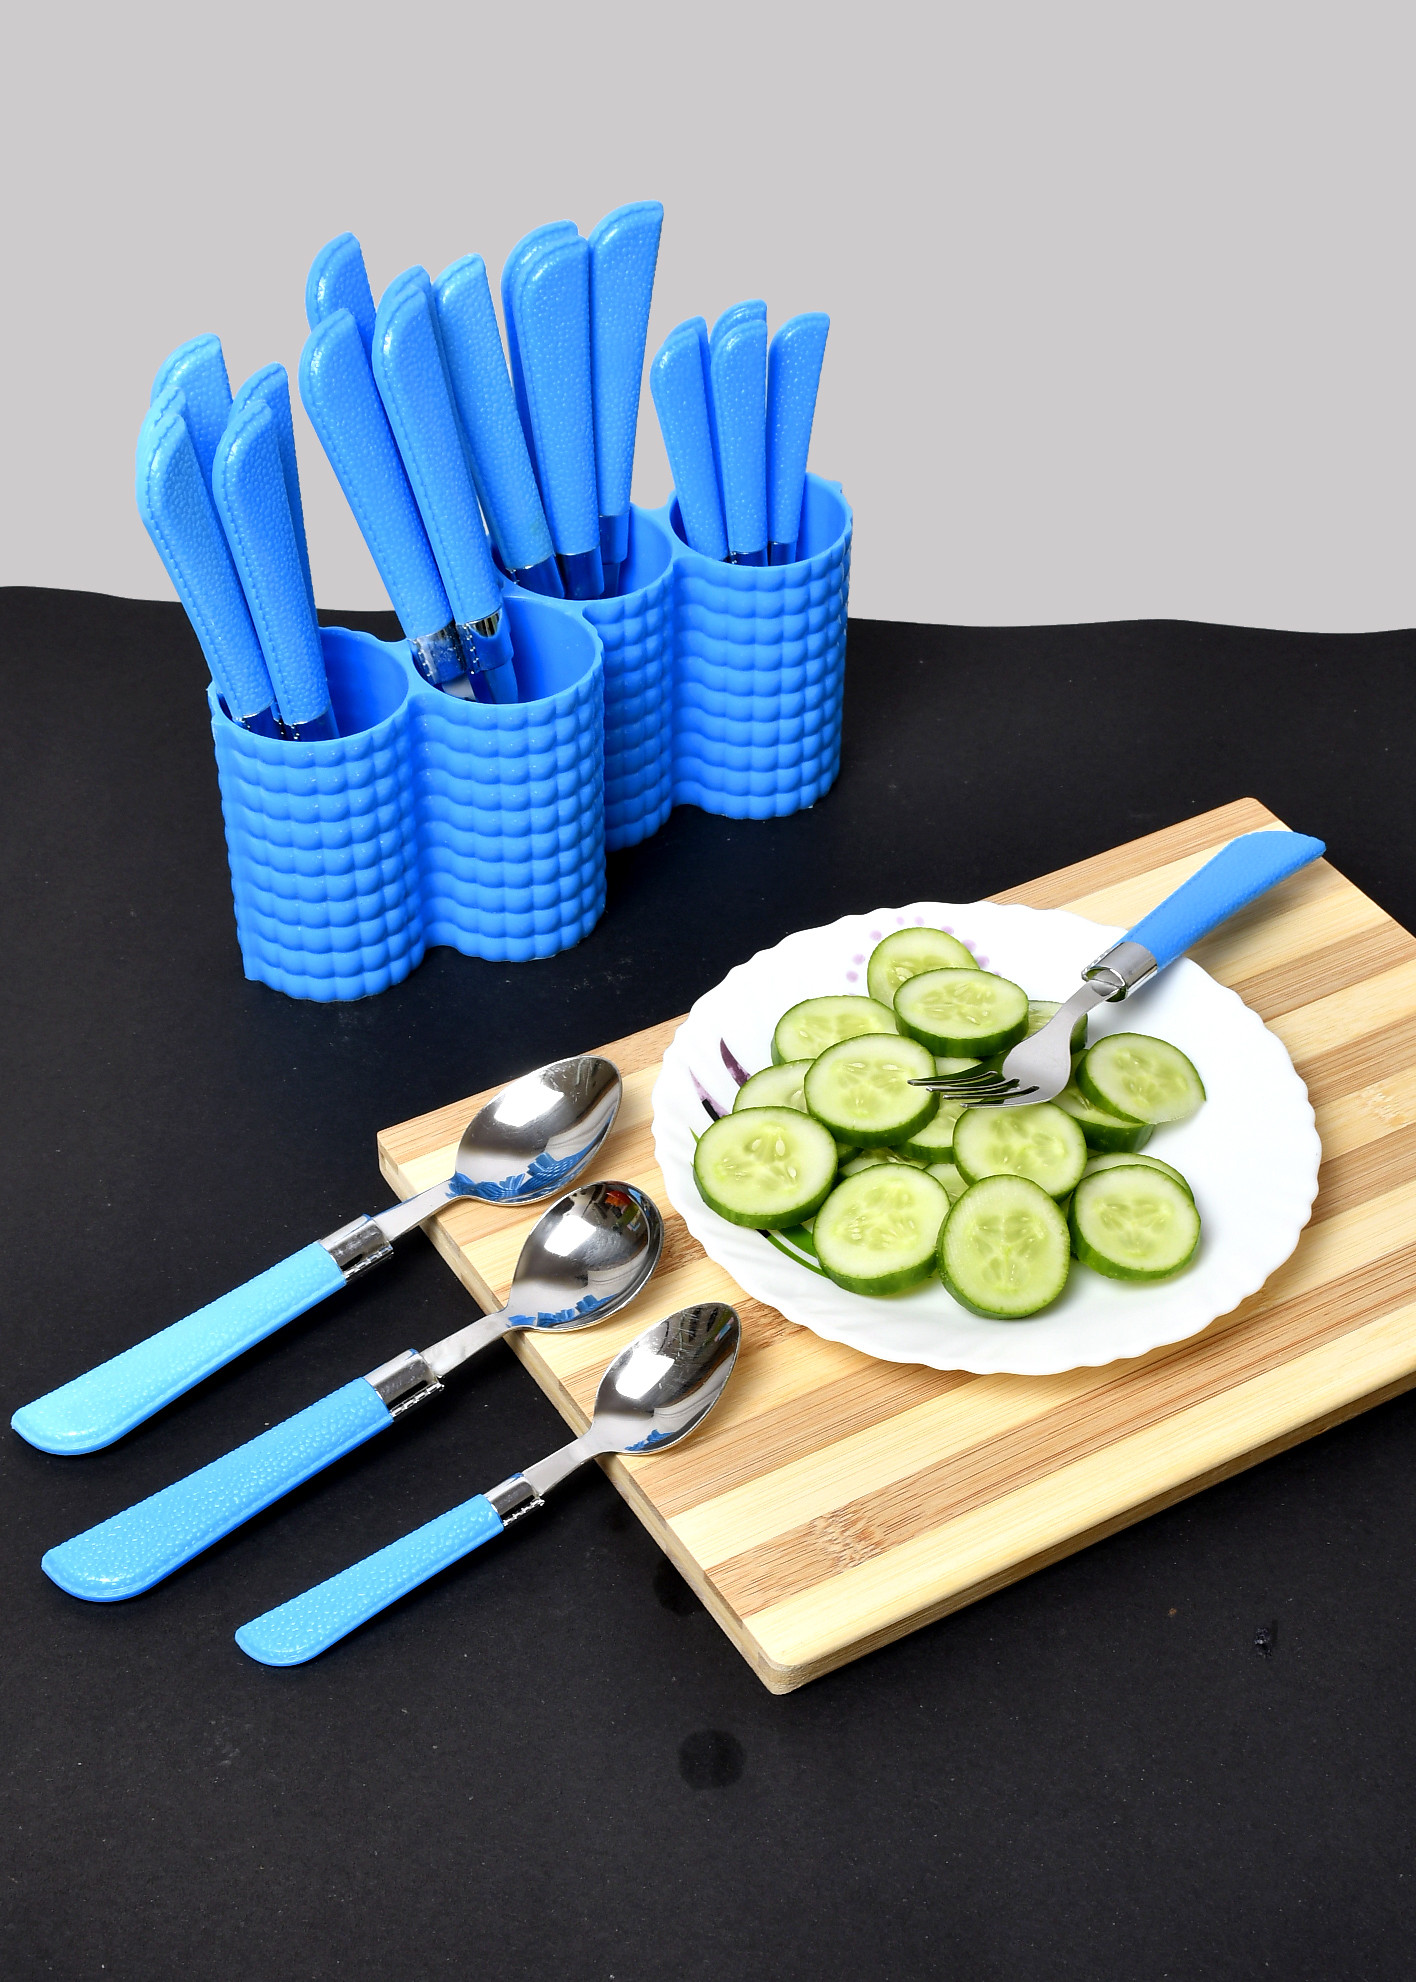 Kuber Industries ABS Plastic & Stainless Steel Nice Cutlery Set, 6 Dessert Spoon, 6 Fork, 6 Soup Spoon, 6 Tea Spoon With 1 Stand (Set of 24, Blue)-KUBMART3296